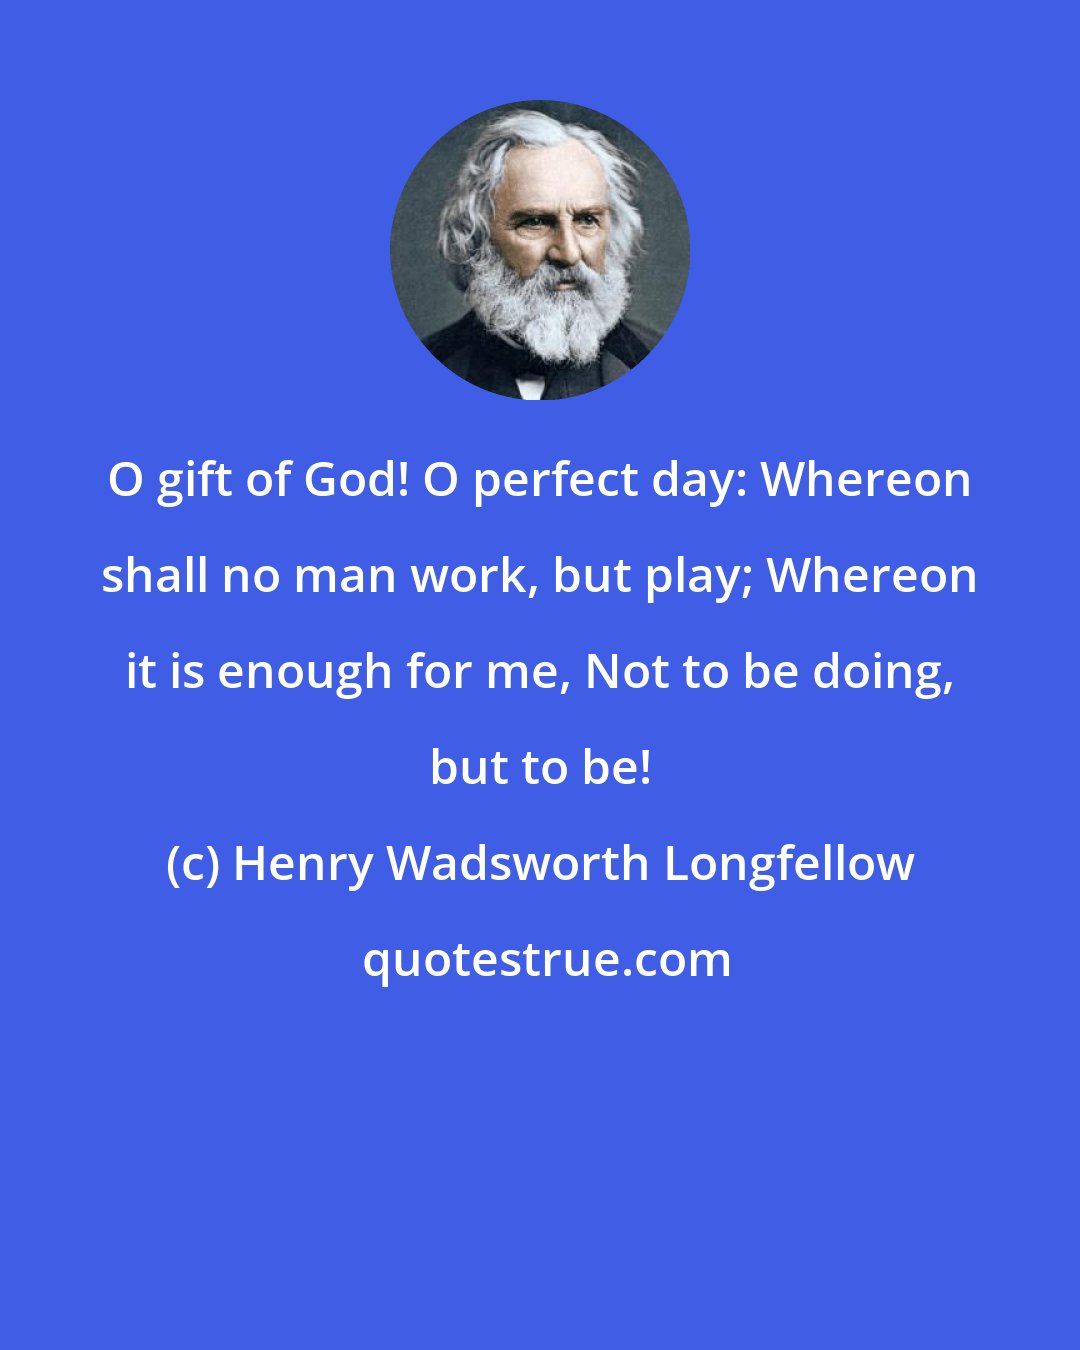 Henry Wadsworth Longfellow: O gift of God! O perfect day: Whereon shall no man work, but play; Whereon it is enough for me, Not to be doing, but to be!